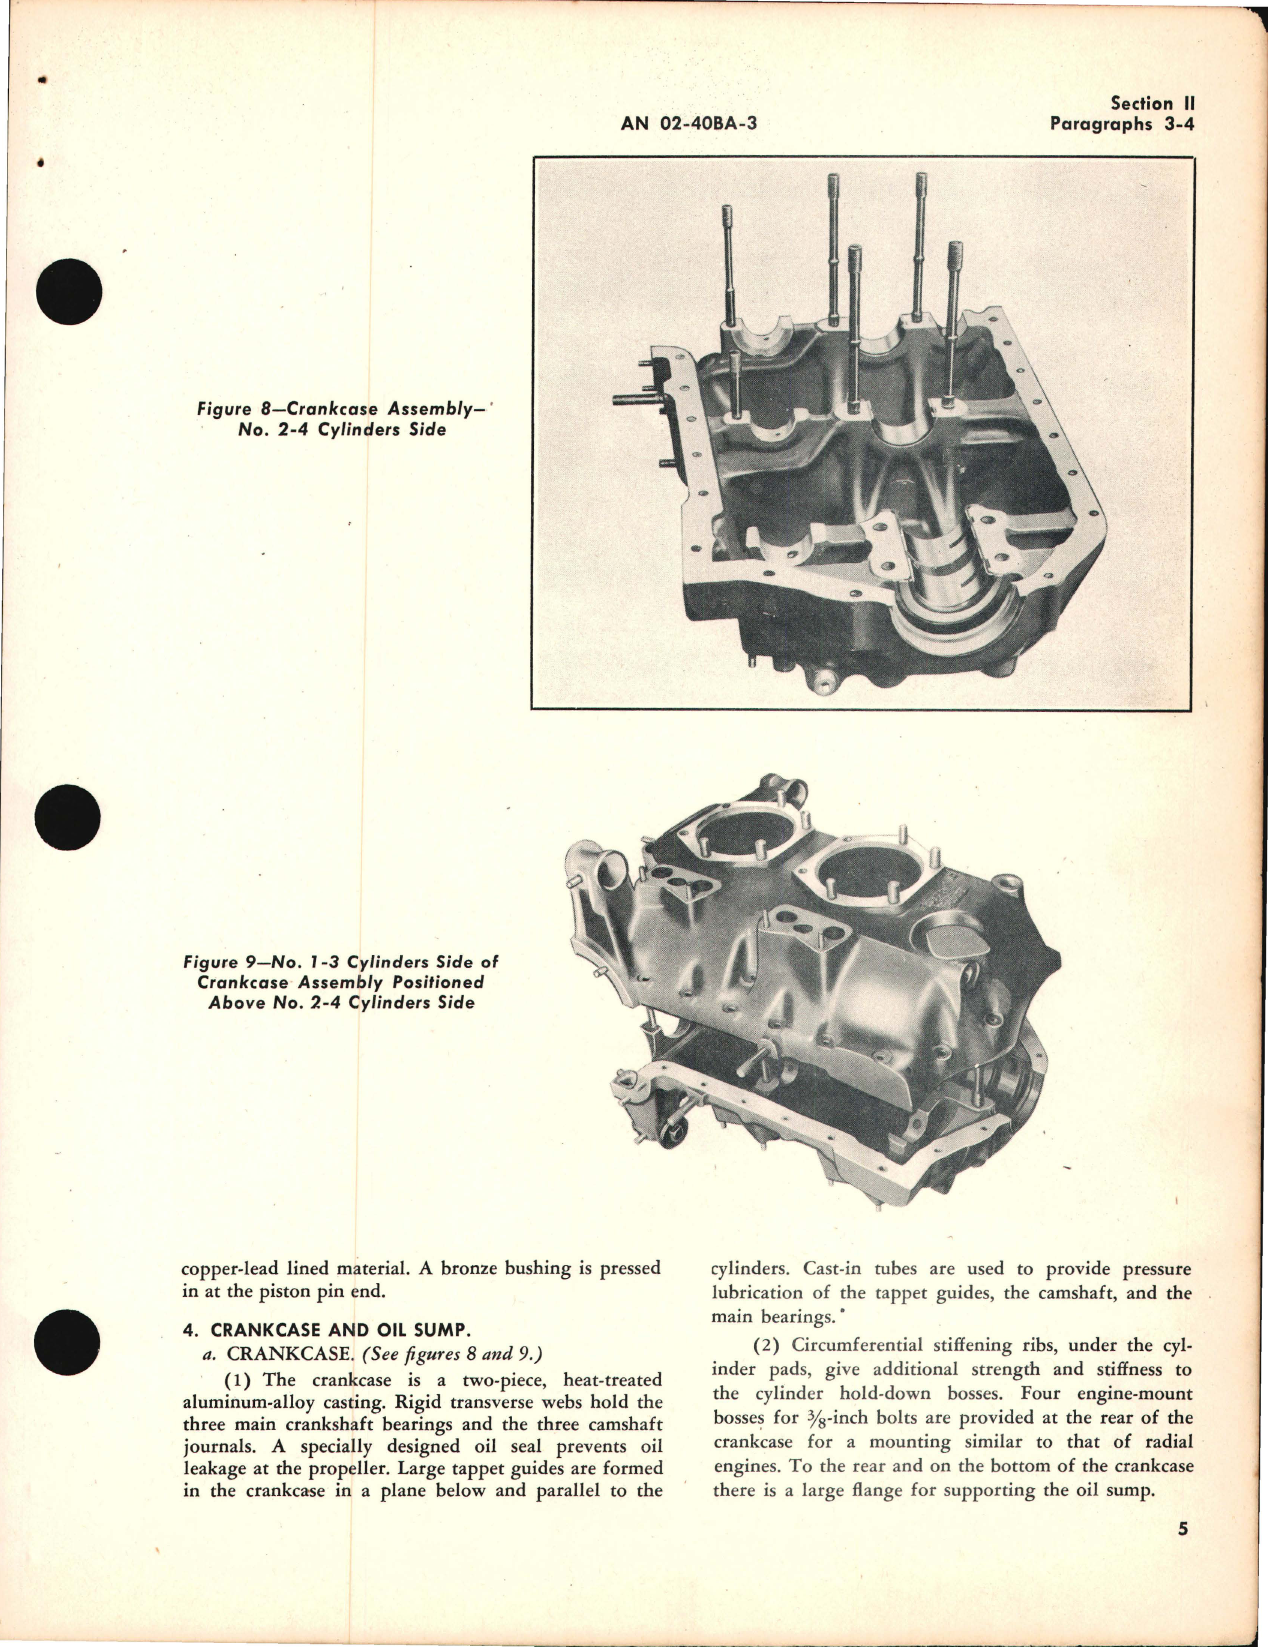 Sample page 9 from AirCorps Library document: Overhaul Instructions for O-170-3 and O-170-7 Engines